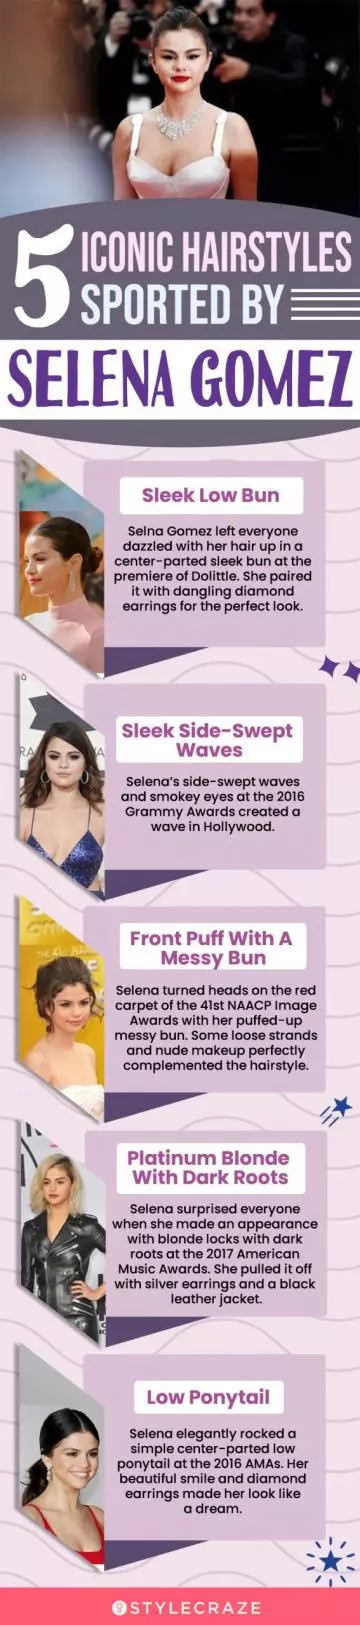 5 iconic hairstyles sported by selena gomez (infographic)